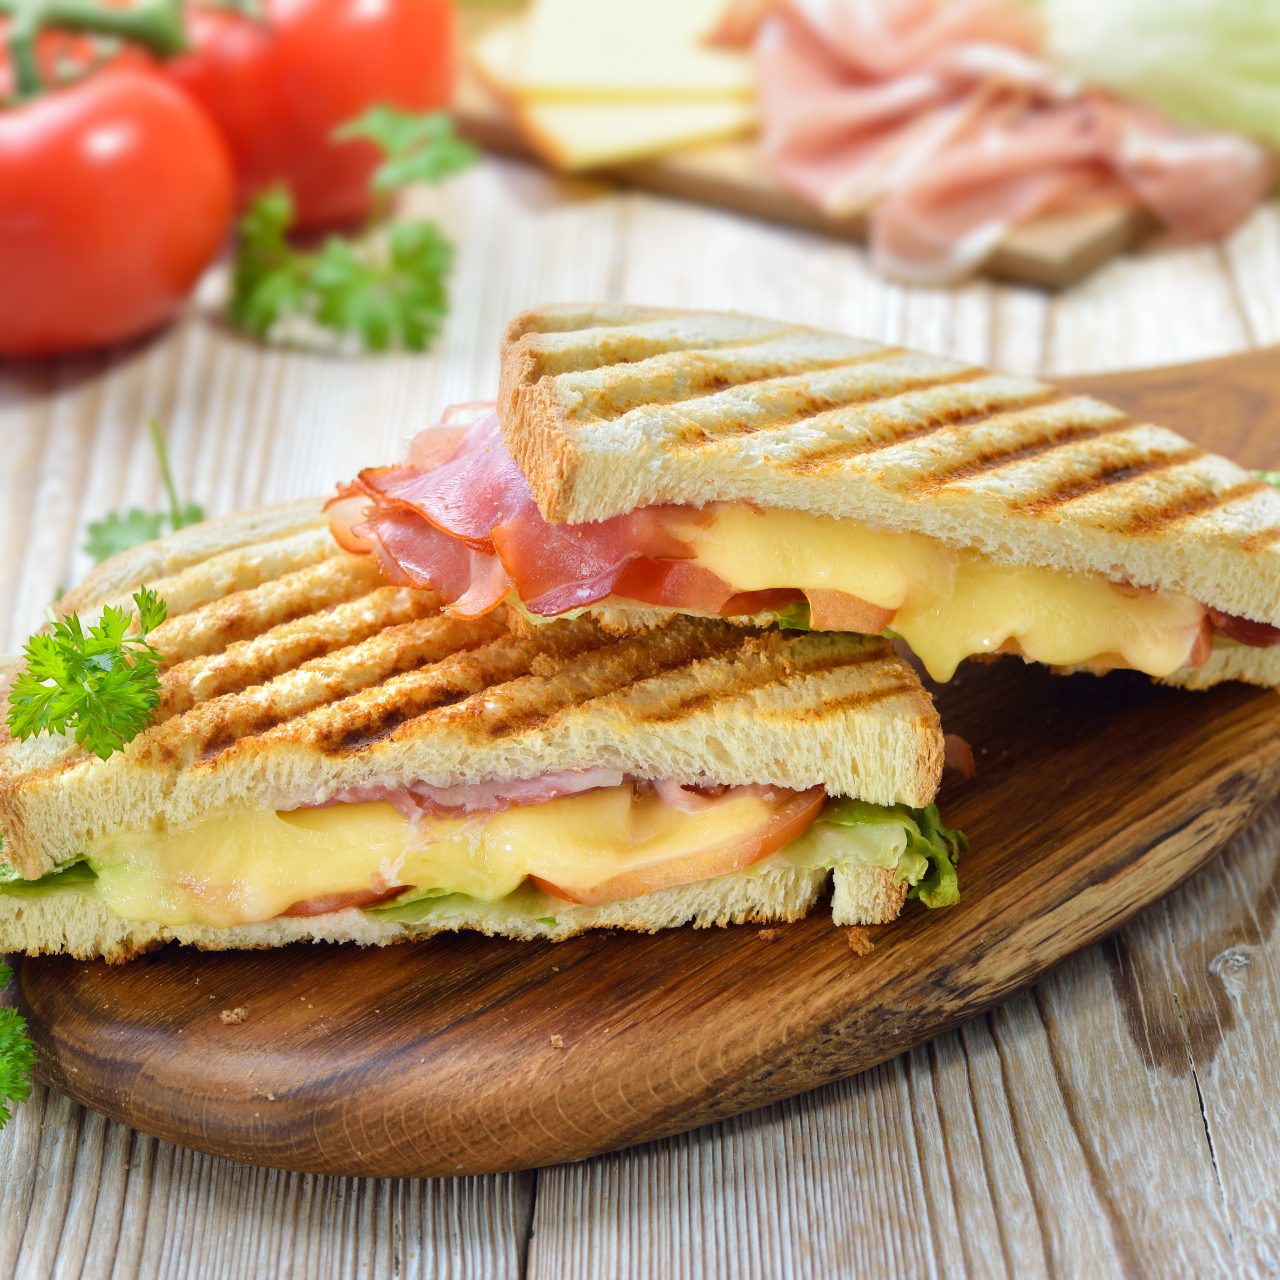 Grilled,And,Pressed,Toast,With,Smoked,Ham,,Cheese,,Tomato,And